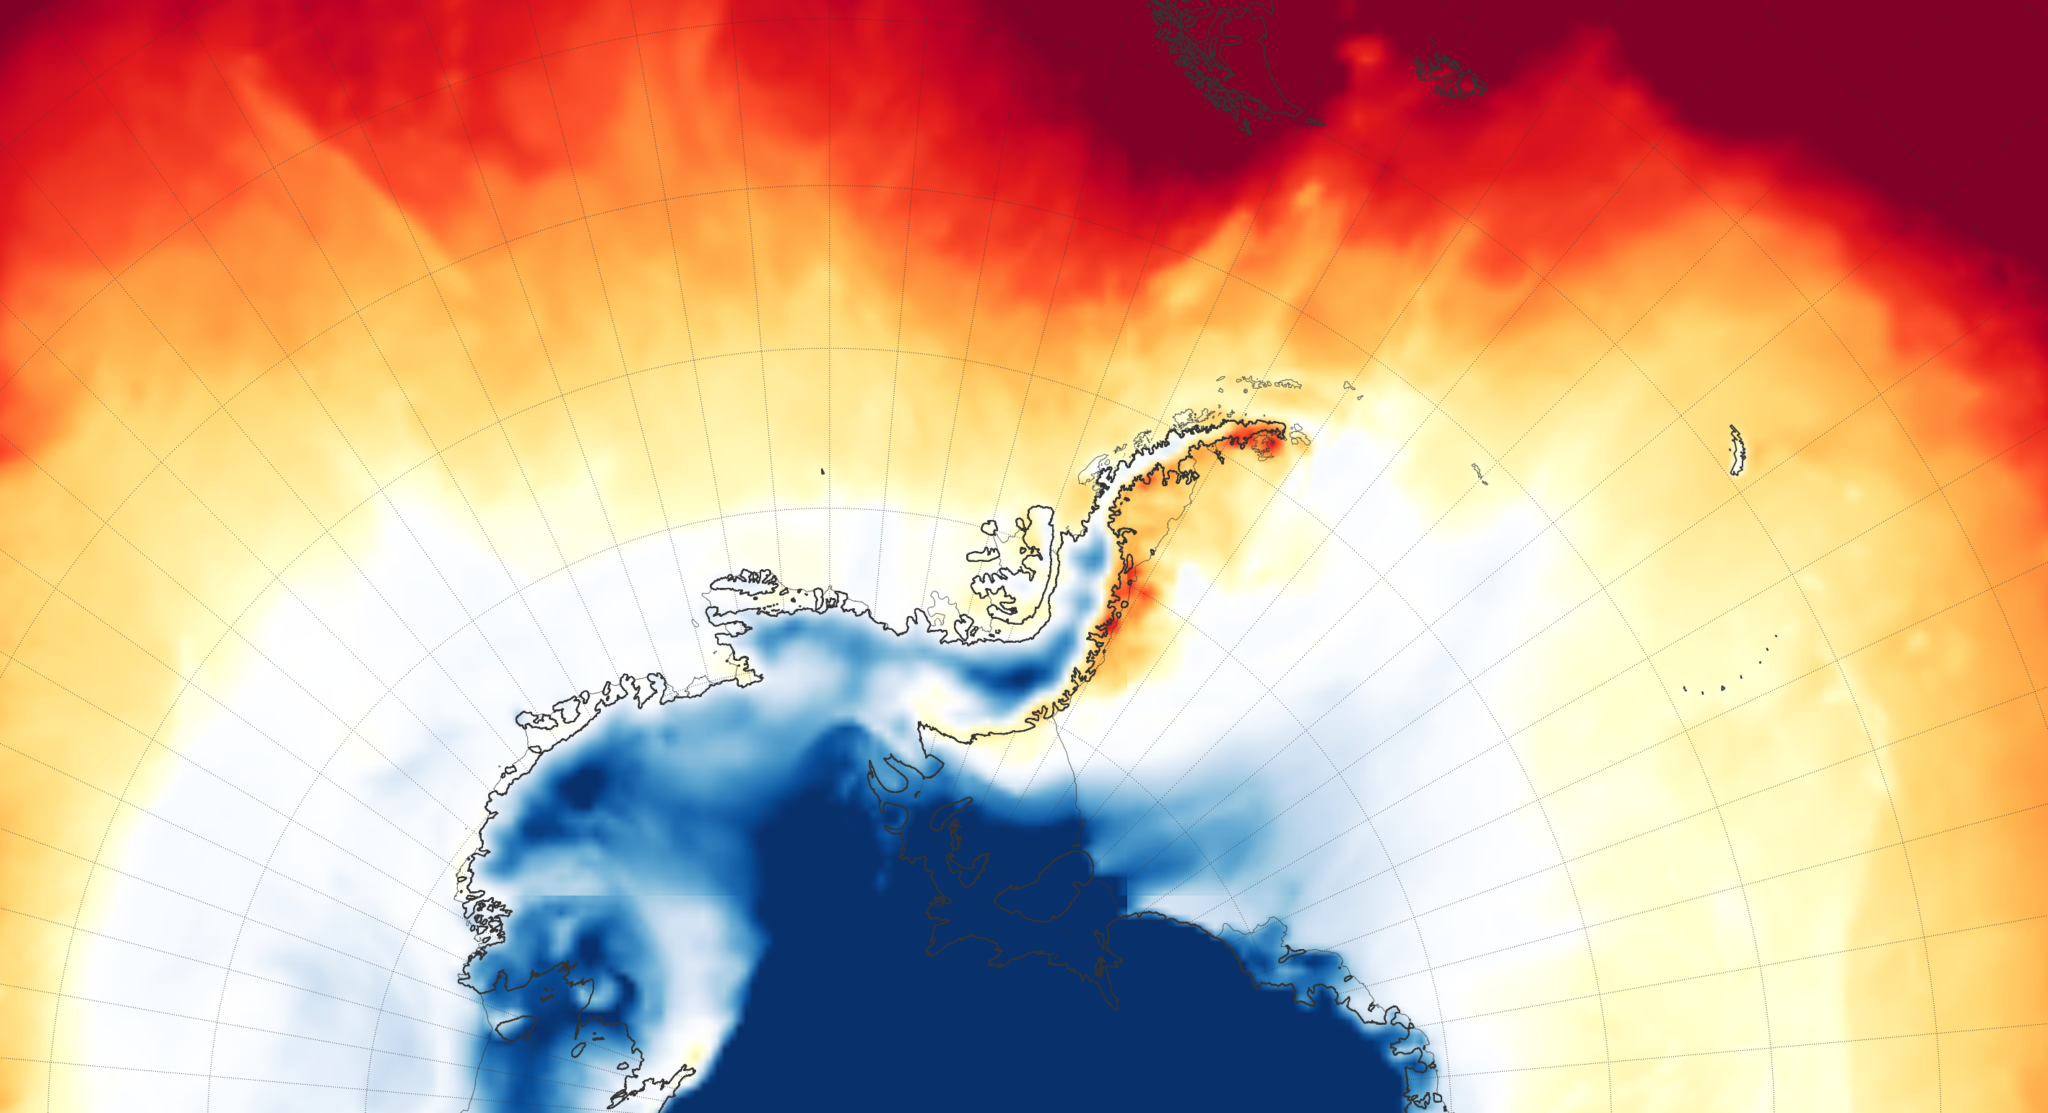 A temperature map of Antartica depicting well-above normal temperatures in dark red.